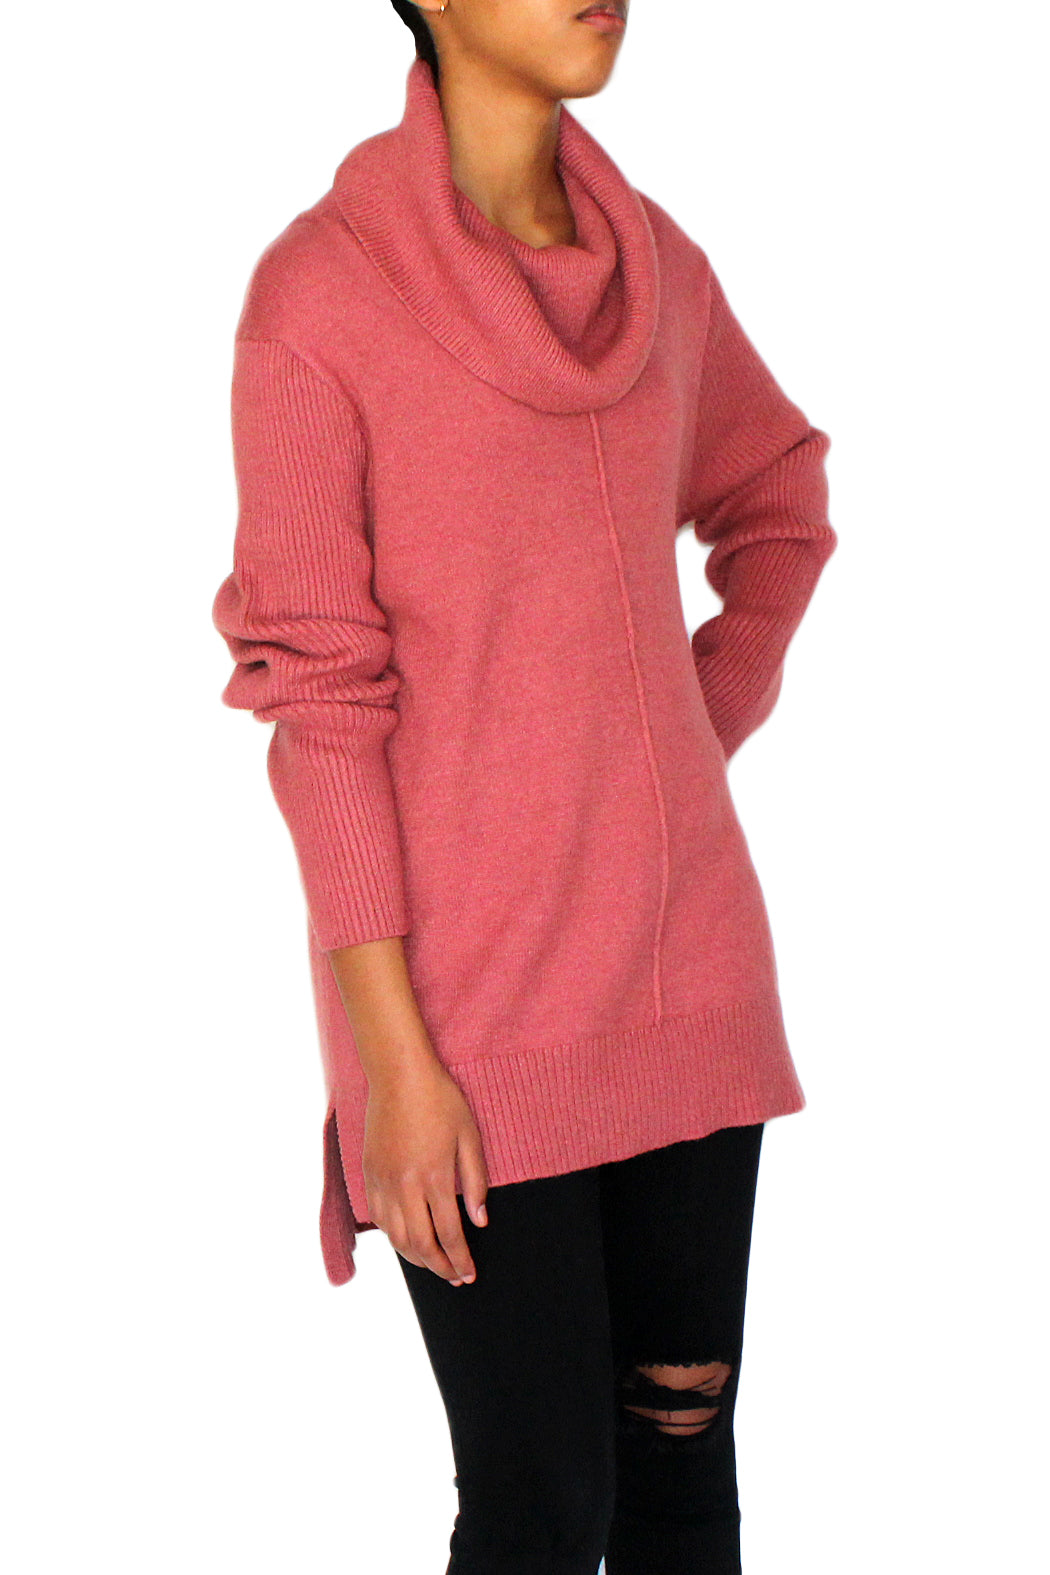 Cowl neck sweater from Vision 155, sweater features long sleeves, Cowl neckline, Hi-low hem, pullover style